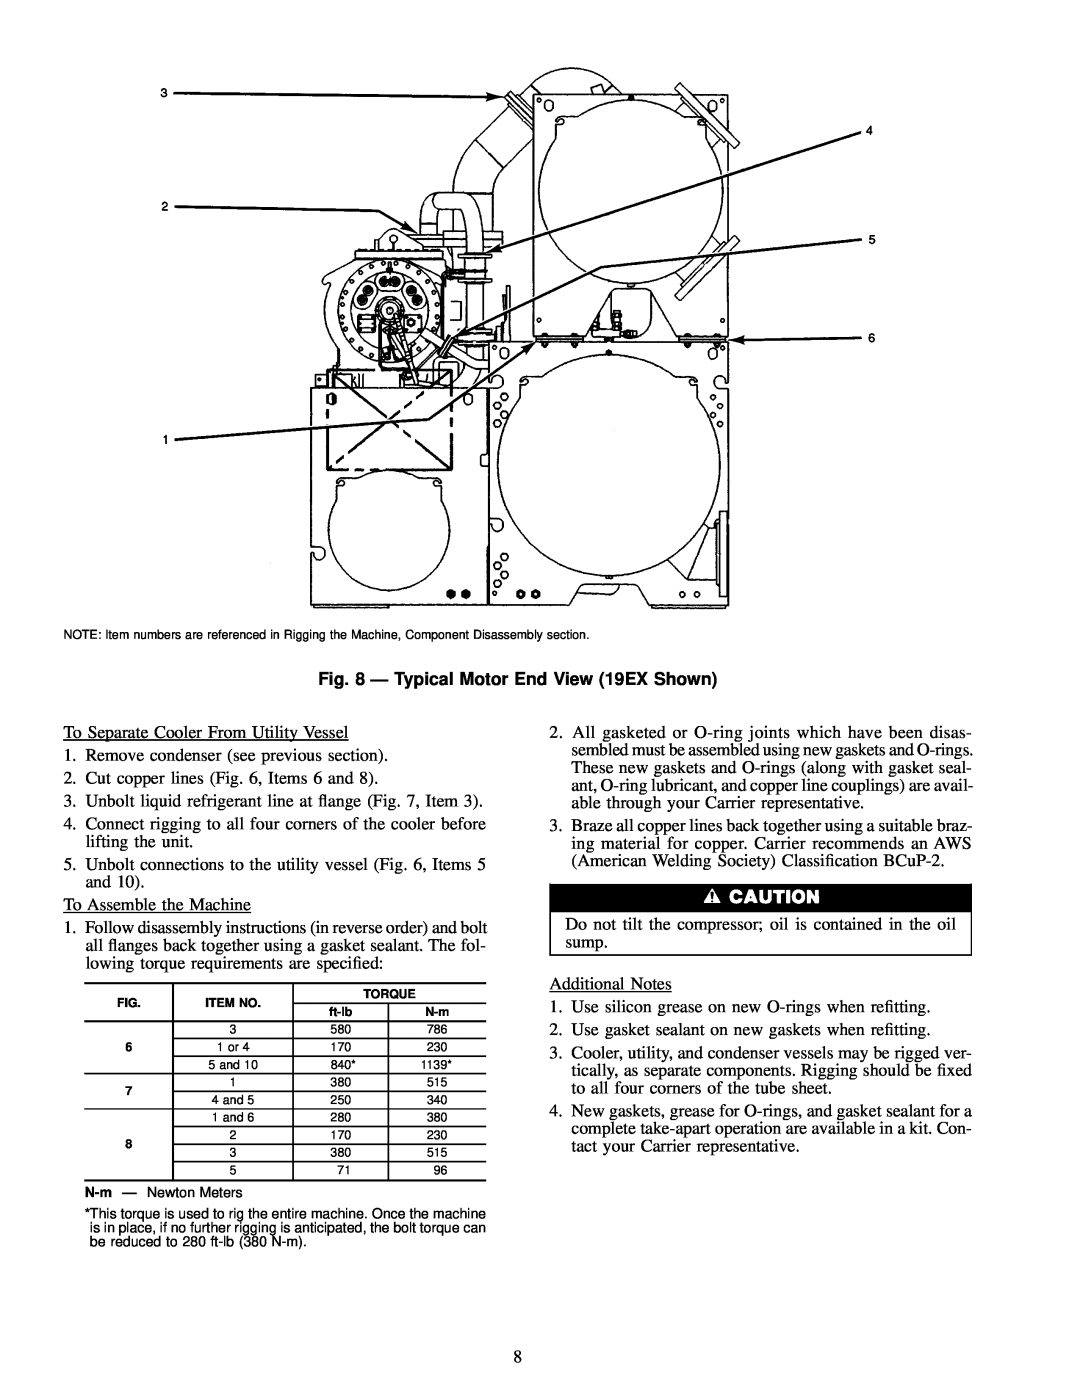 Carrier 17 installation instructions Ð Typical Motor End View 19EX Shown 